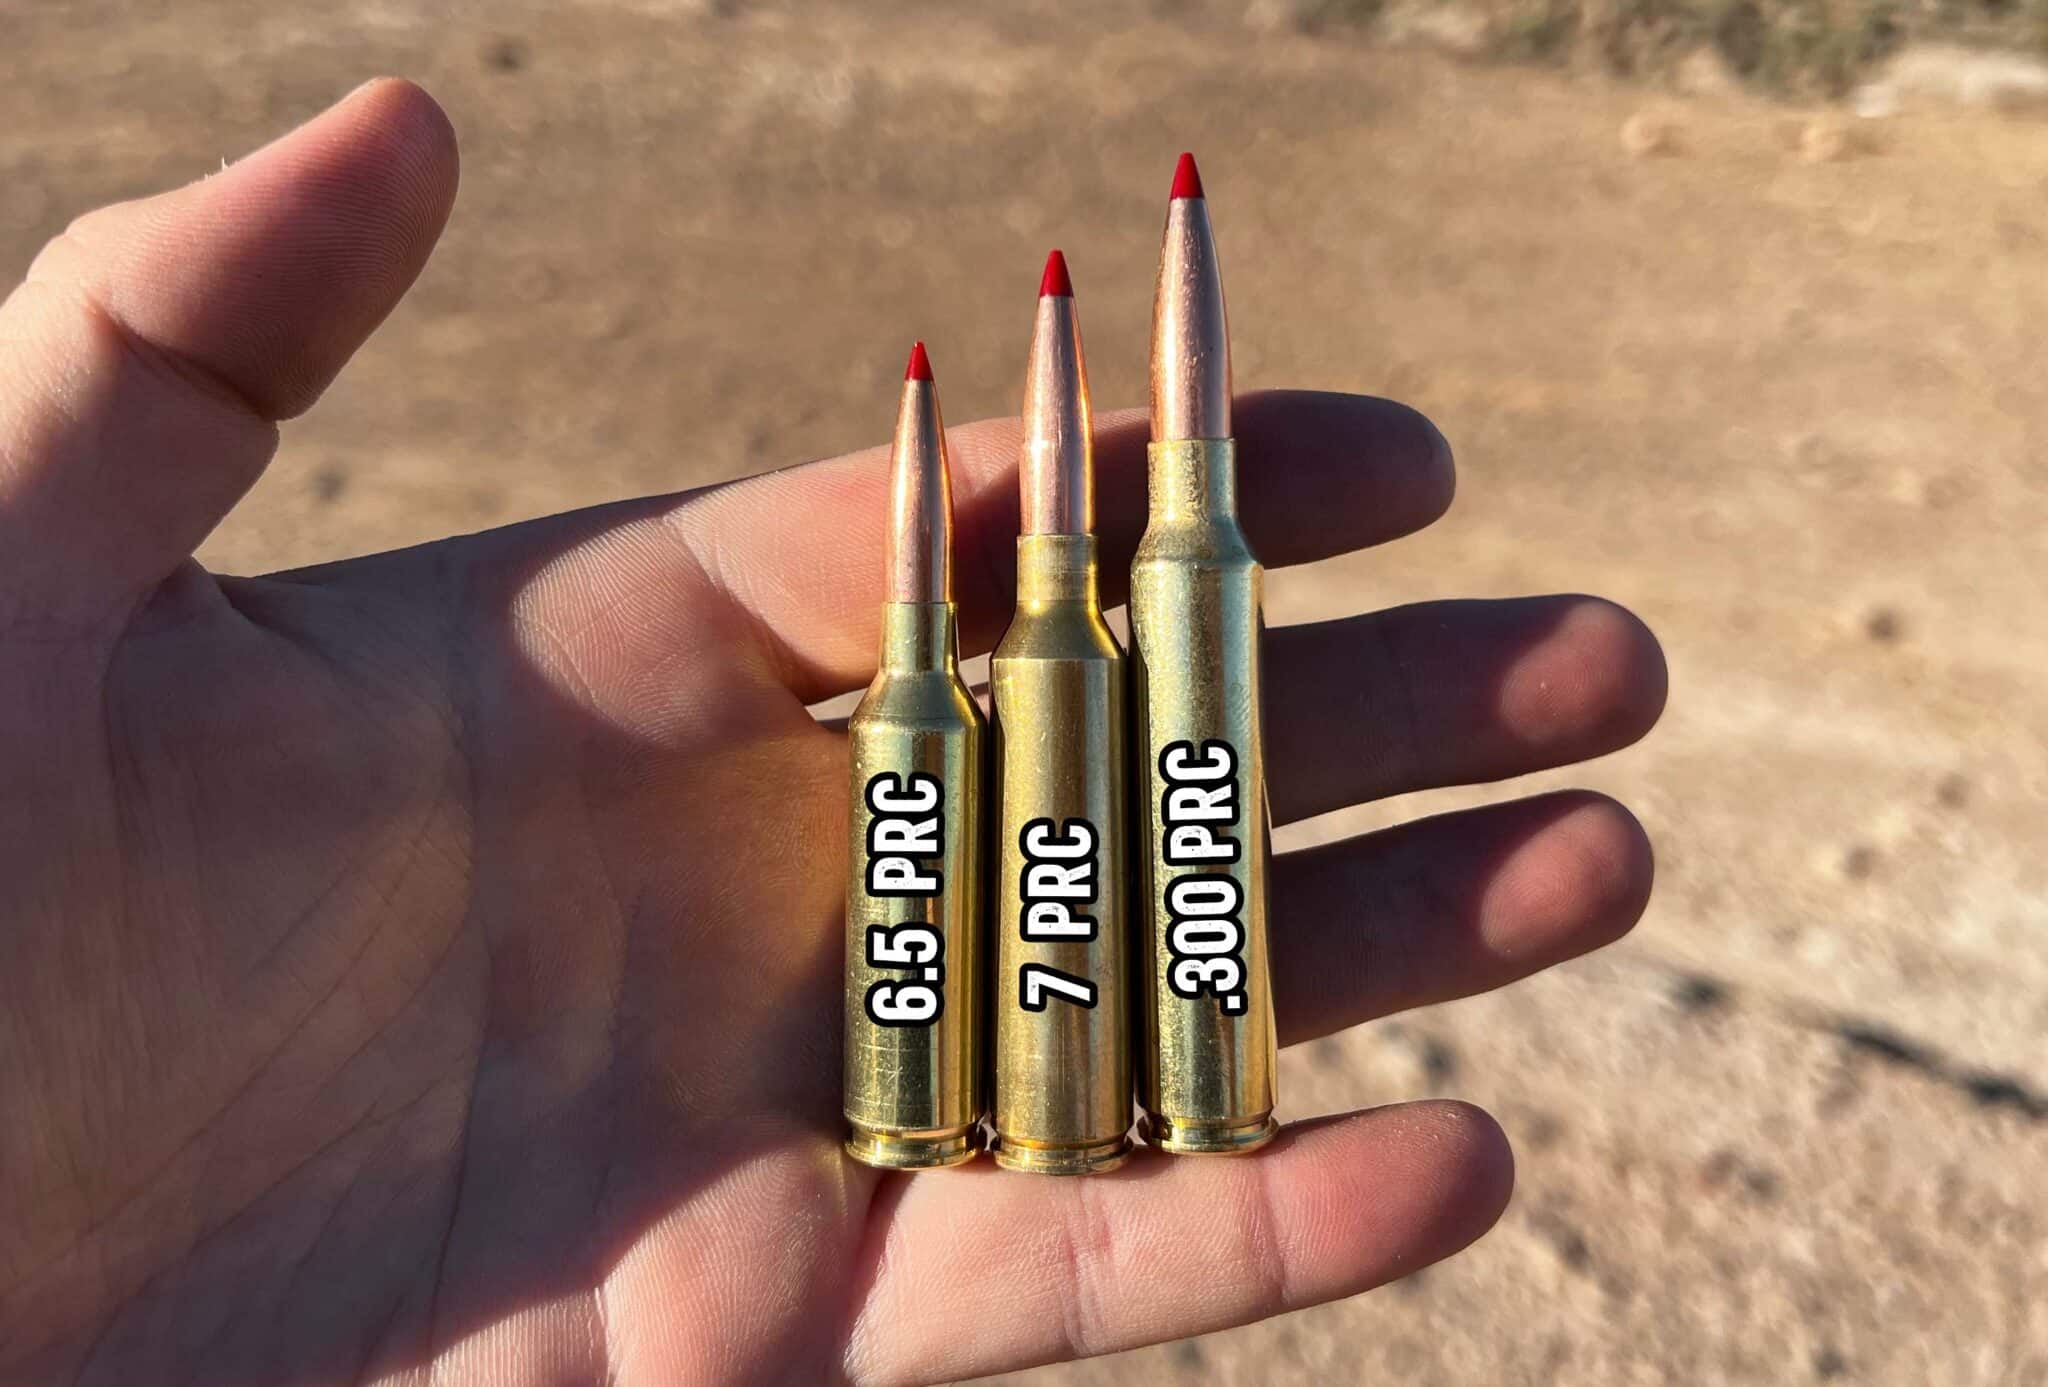 Image of 6.5 PRC, 7 PRC, and 300 PRC cartridges